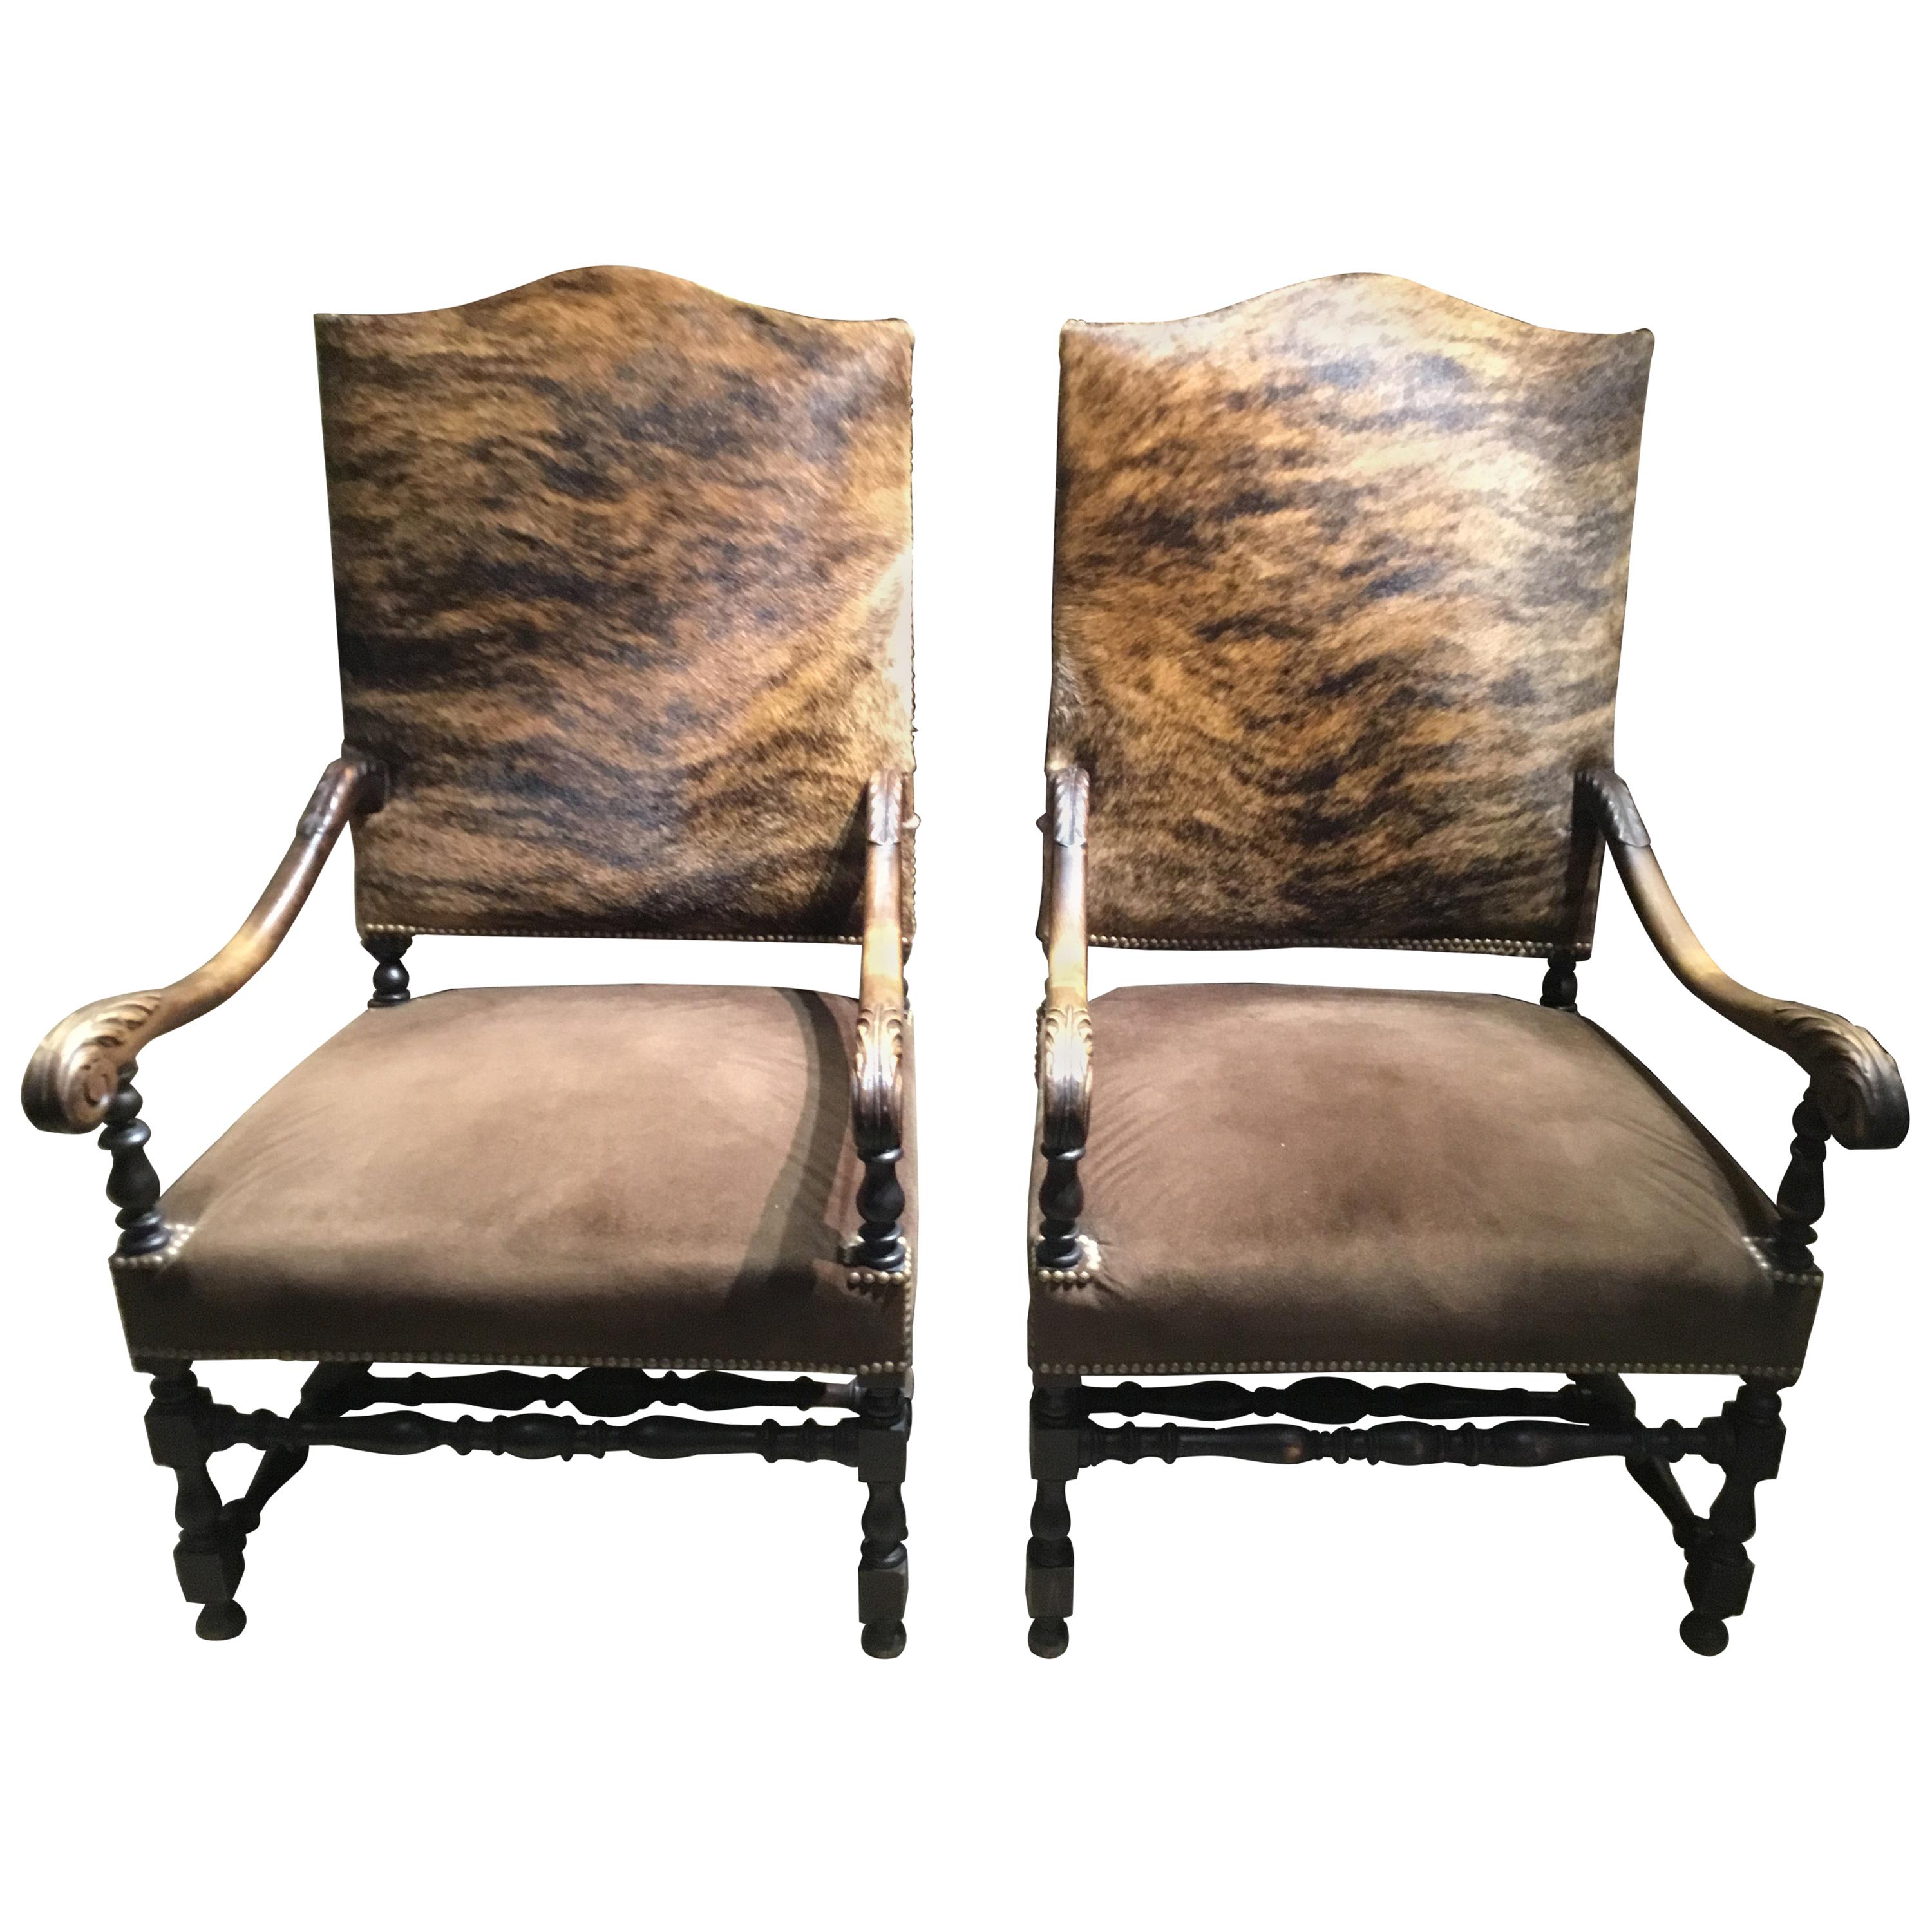 Pair of French Renaissance Style Chairs, 19th Century with Cow Hide Upholstery